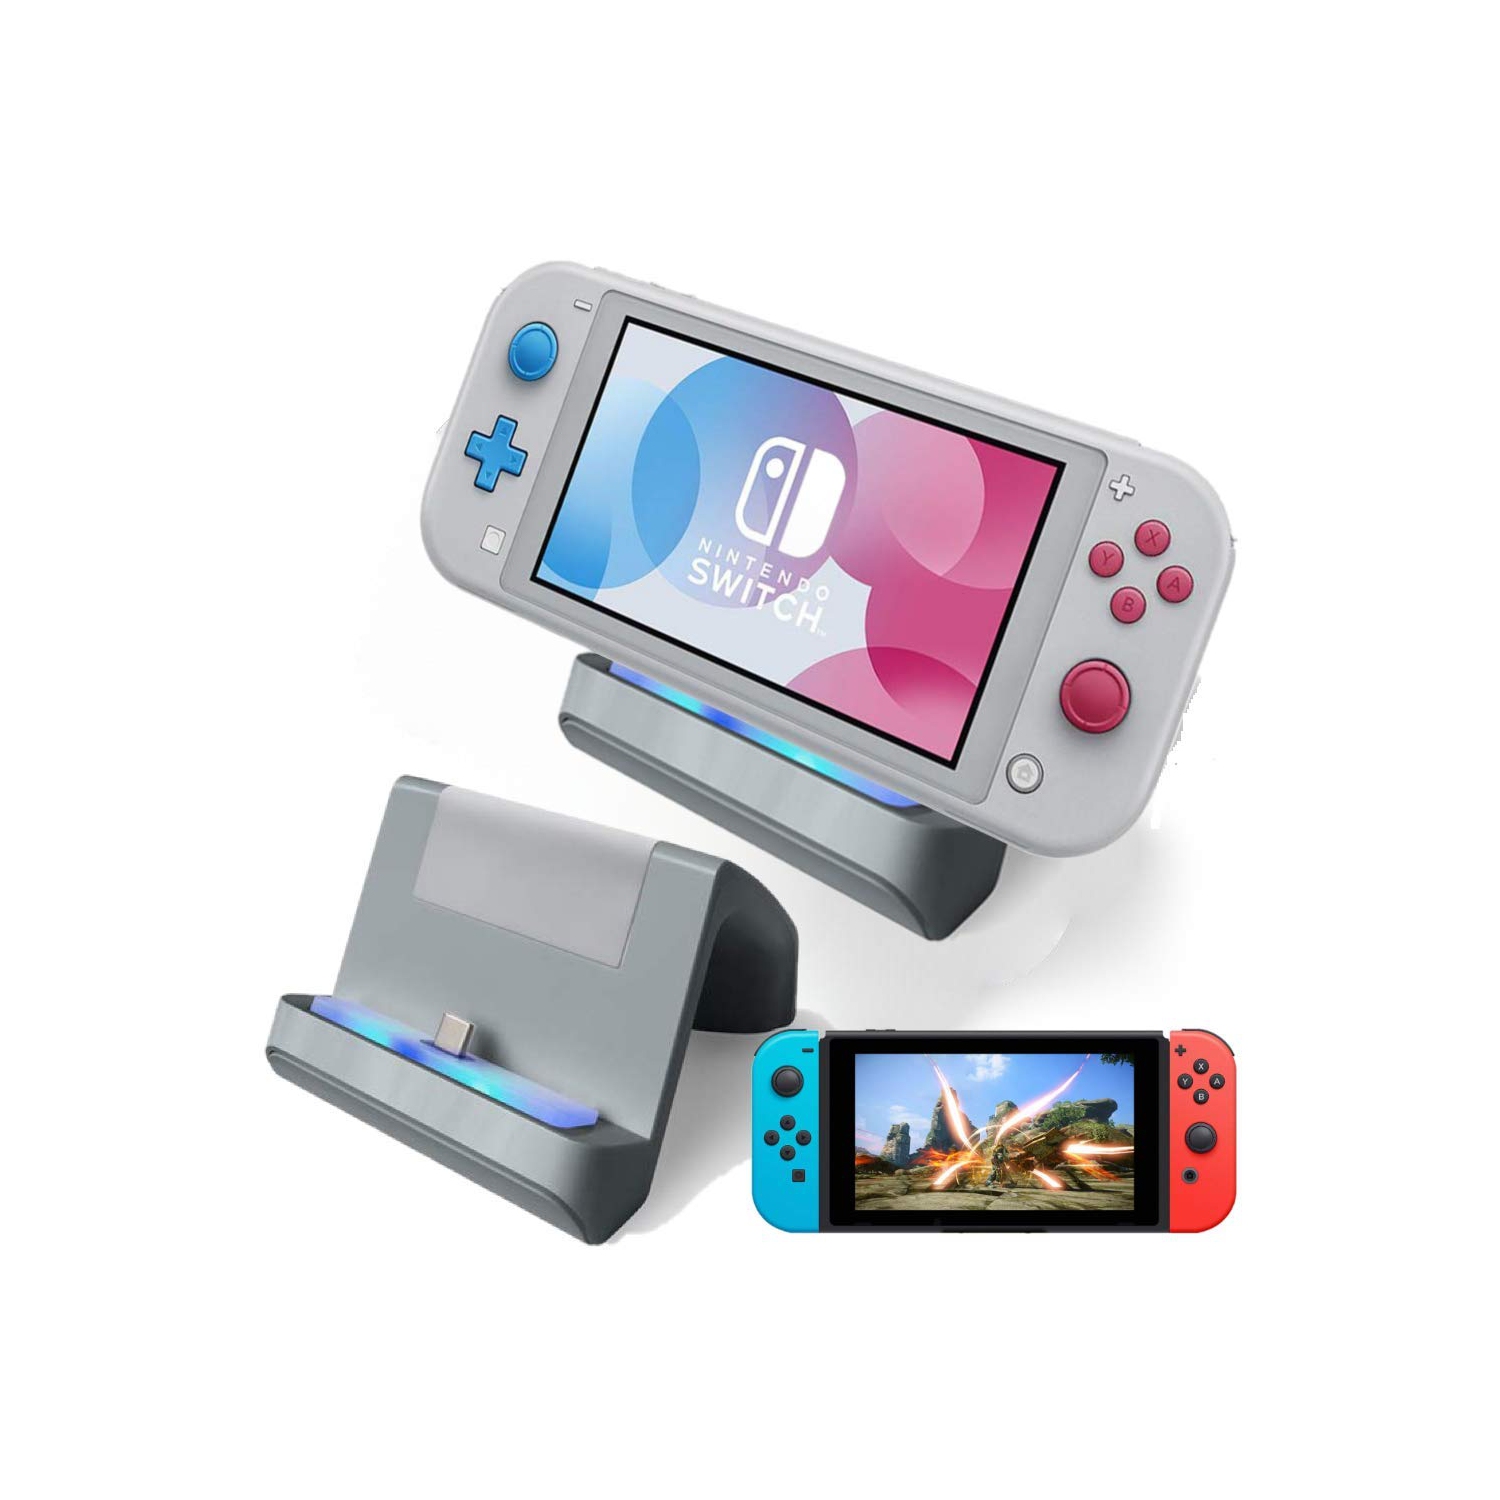 TNE - Switch Lite Charger Stand | Mini Charging Display Dock Station with USB Type C Port for Nintendo Switch/Switch Lite 20